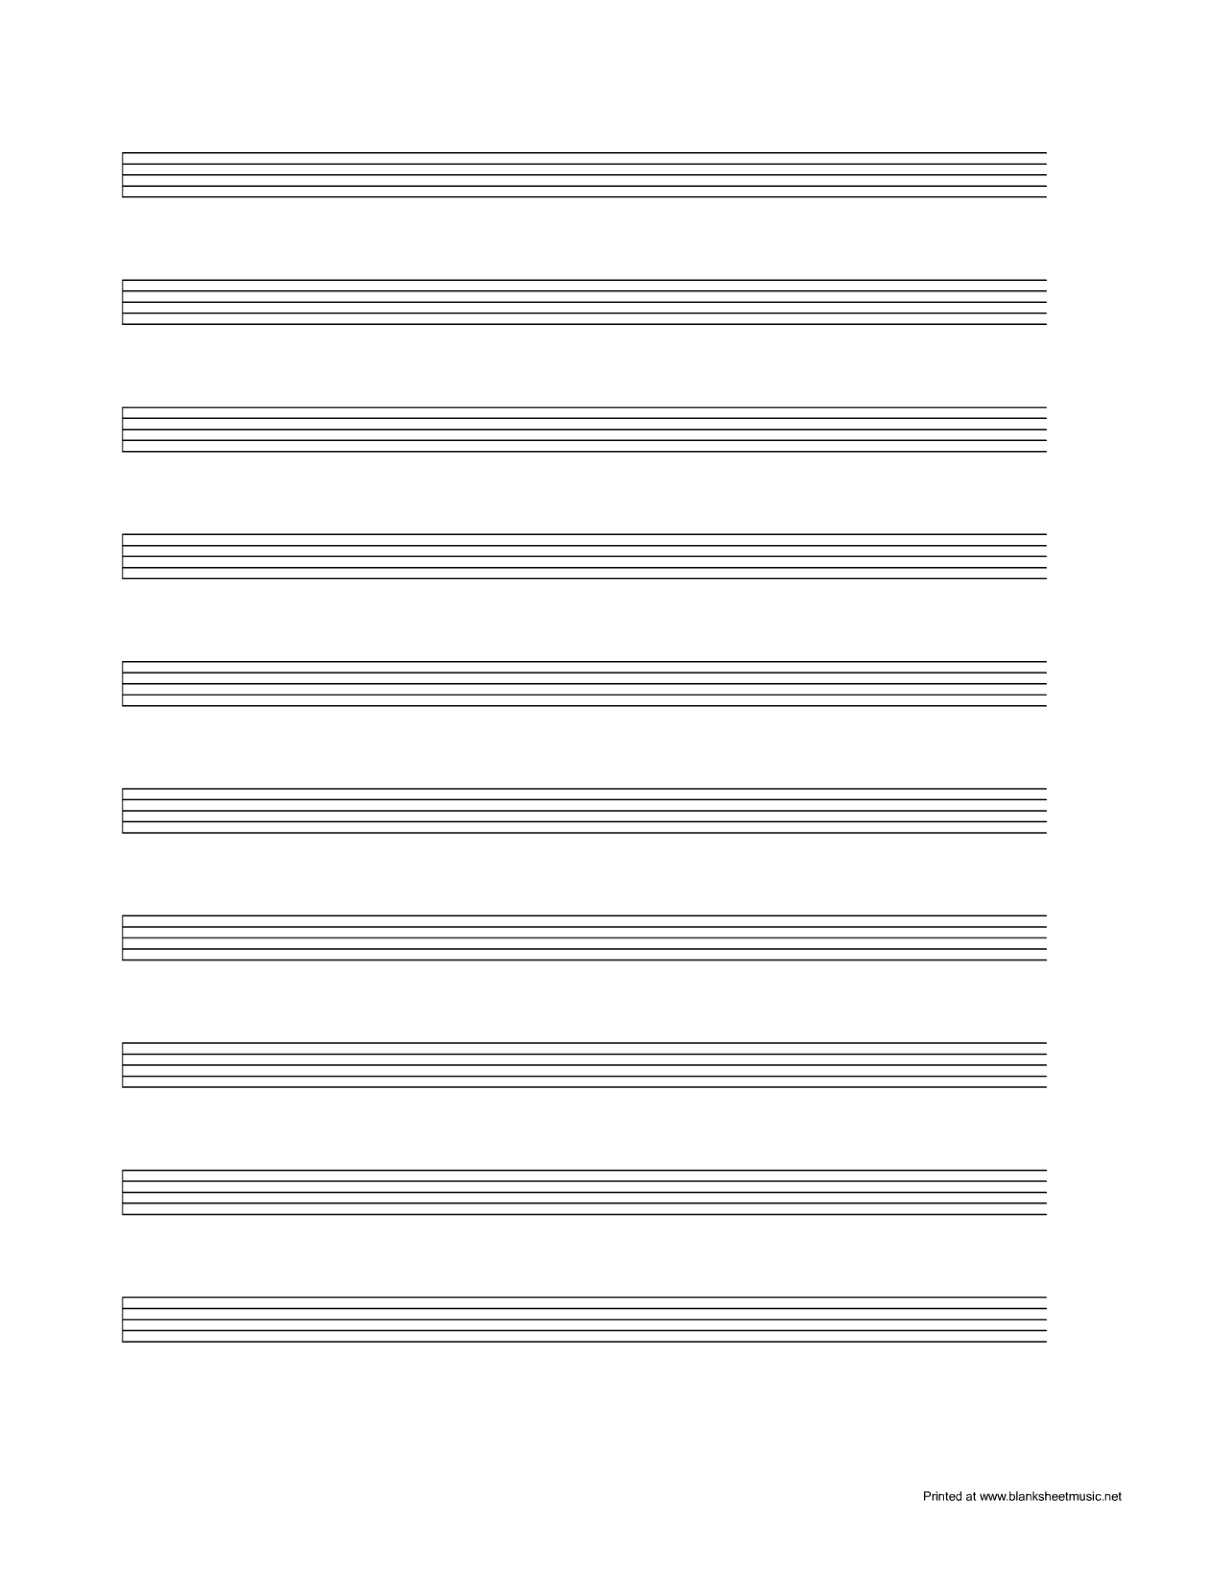 Sheet Music Template Blank For Word Free Pdf Spreadsheet Throughout Blank Sheet Music Template For Word